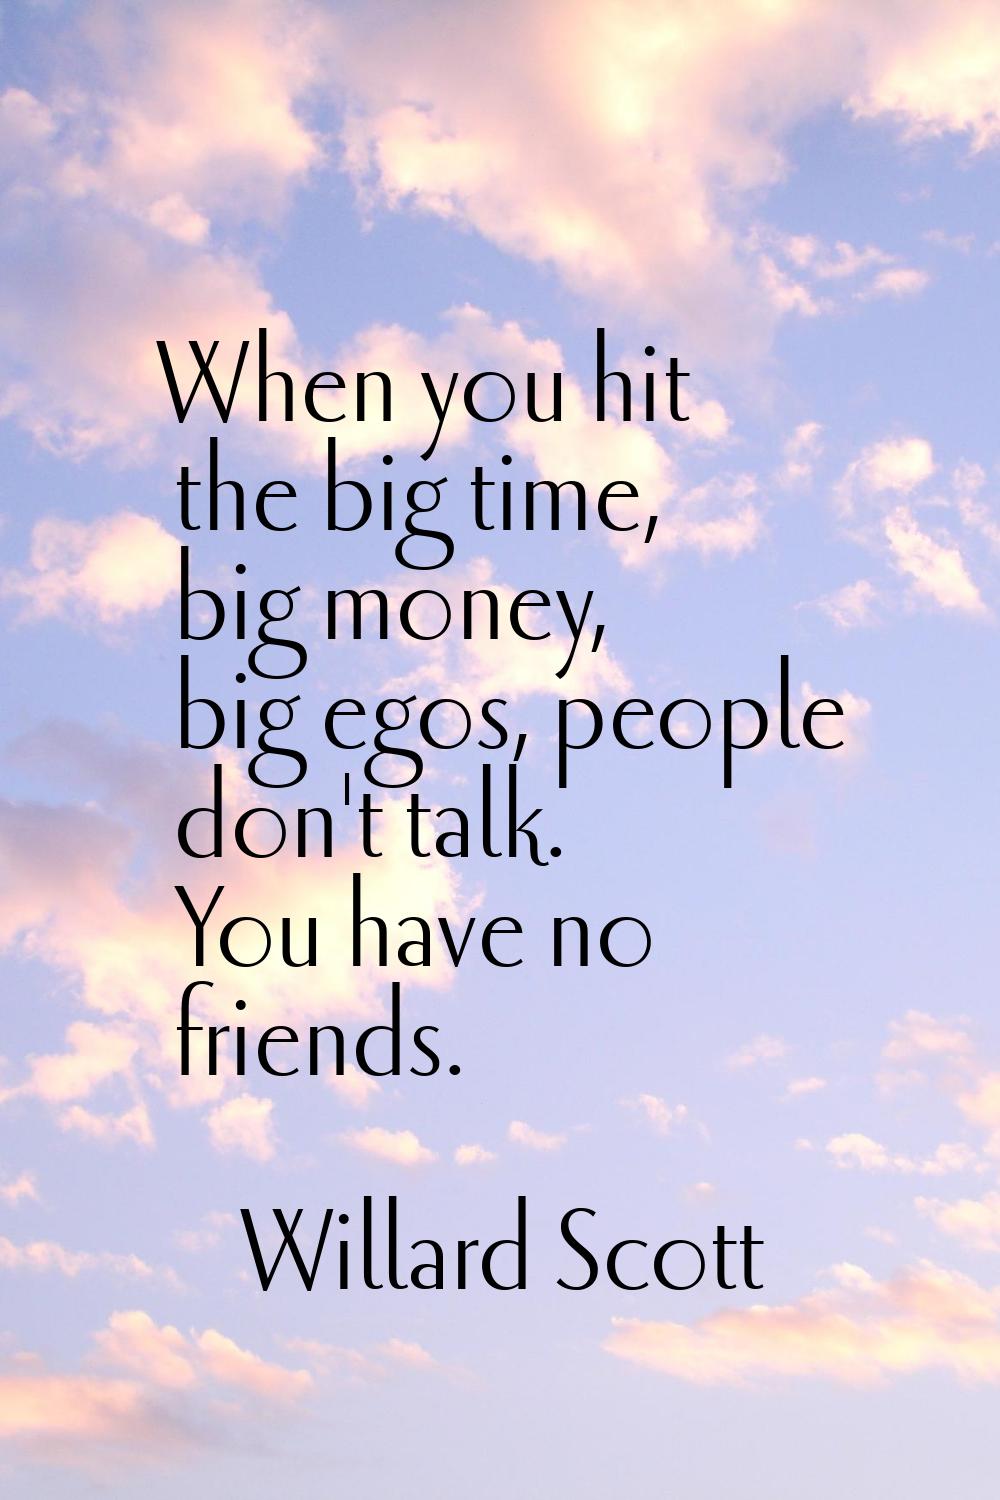 When you hit the big time, big money, big egos, people don't talk. You have no friends.